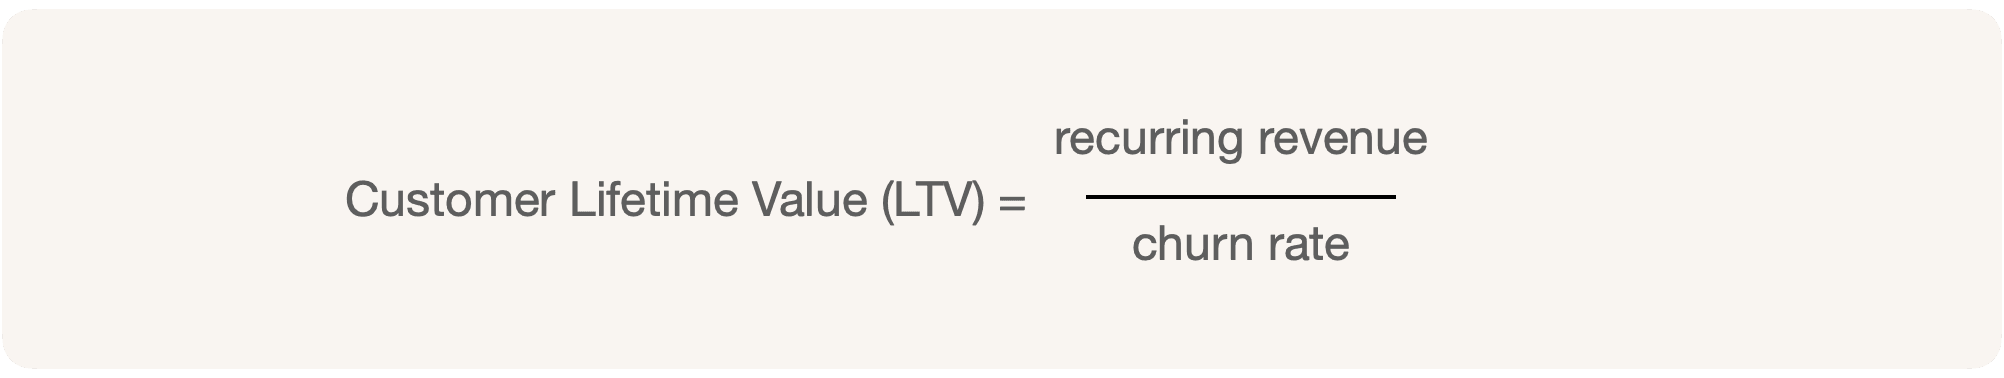 Customer Life time Value is ratio of recurring revenue and churn rate